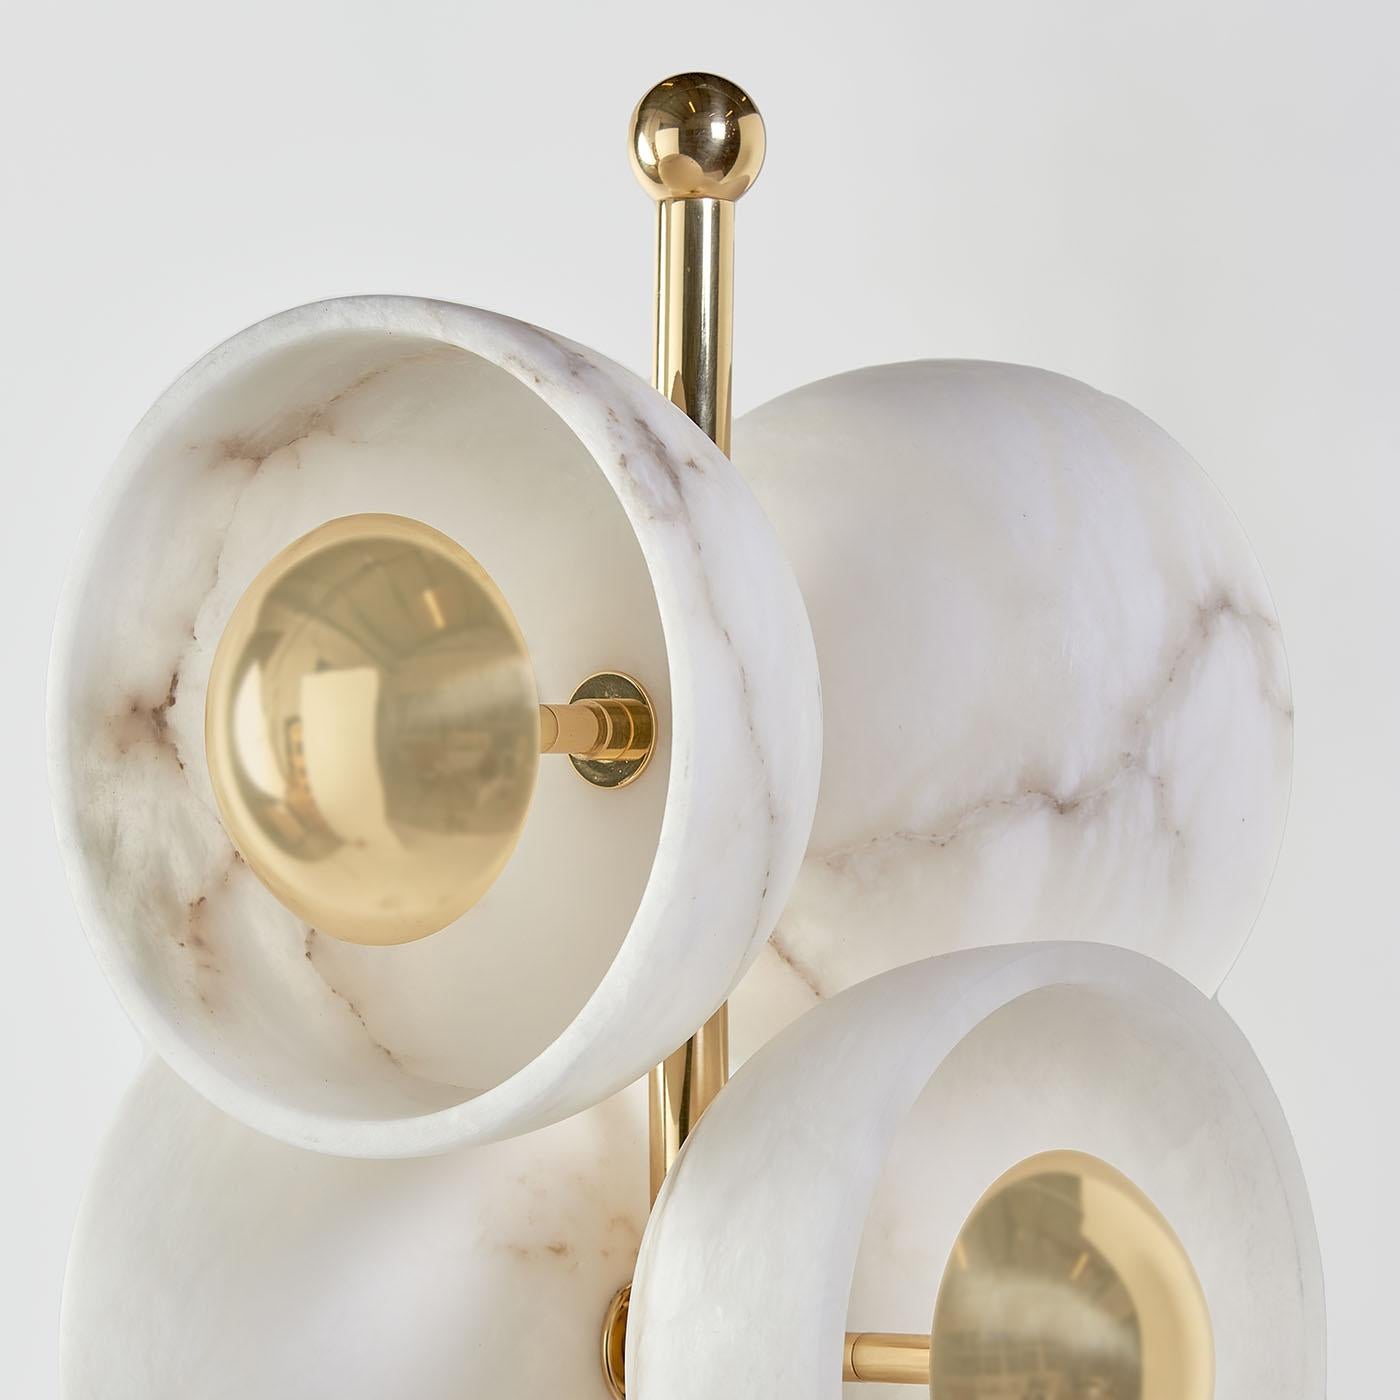 The Butterfly floor lamp is a beautiful and unique piece that can bring a touch of elegance to any contemporary setting. Using alabaster cups and polished brass covers creates a delicate and airy design resembling butterflies' wings. The hidden